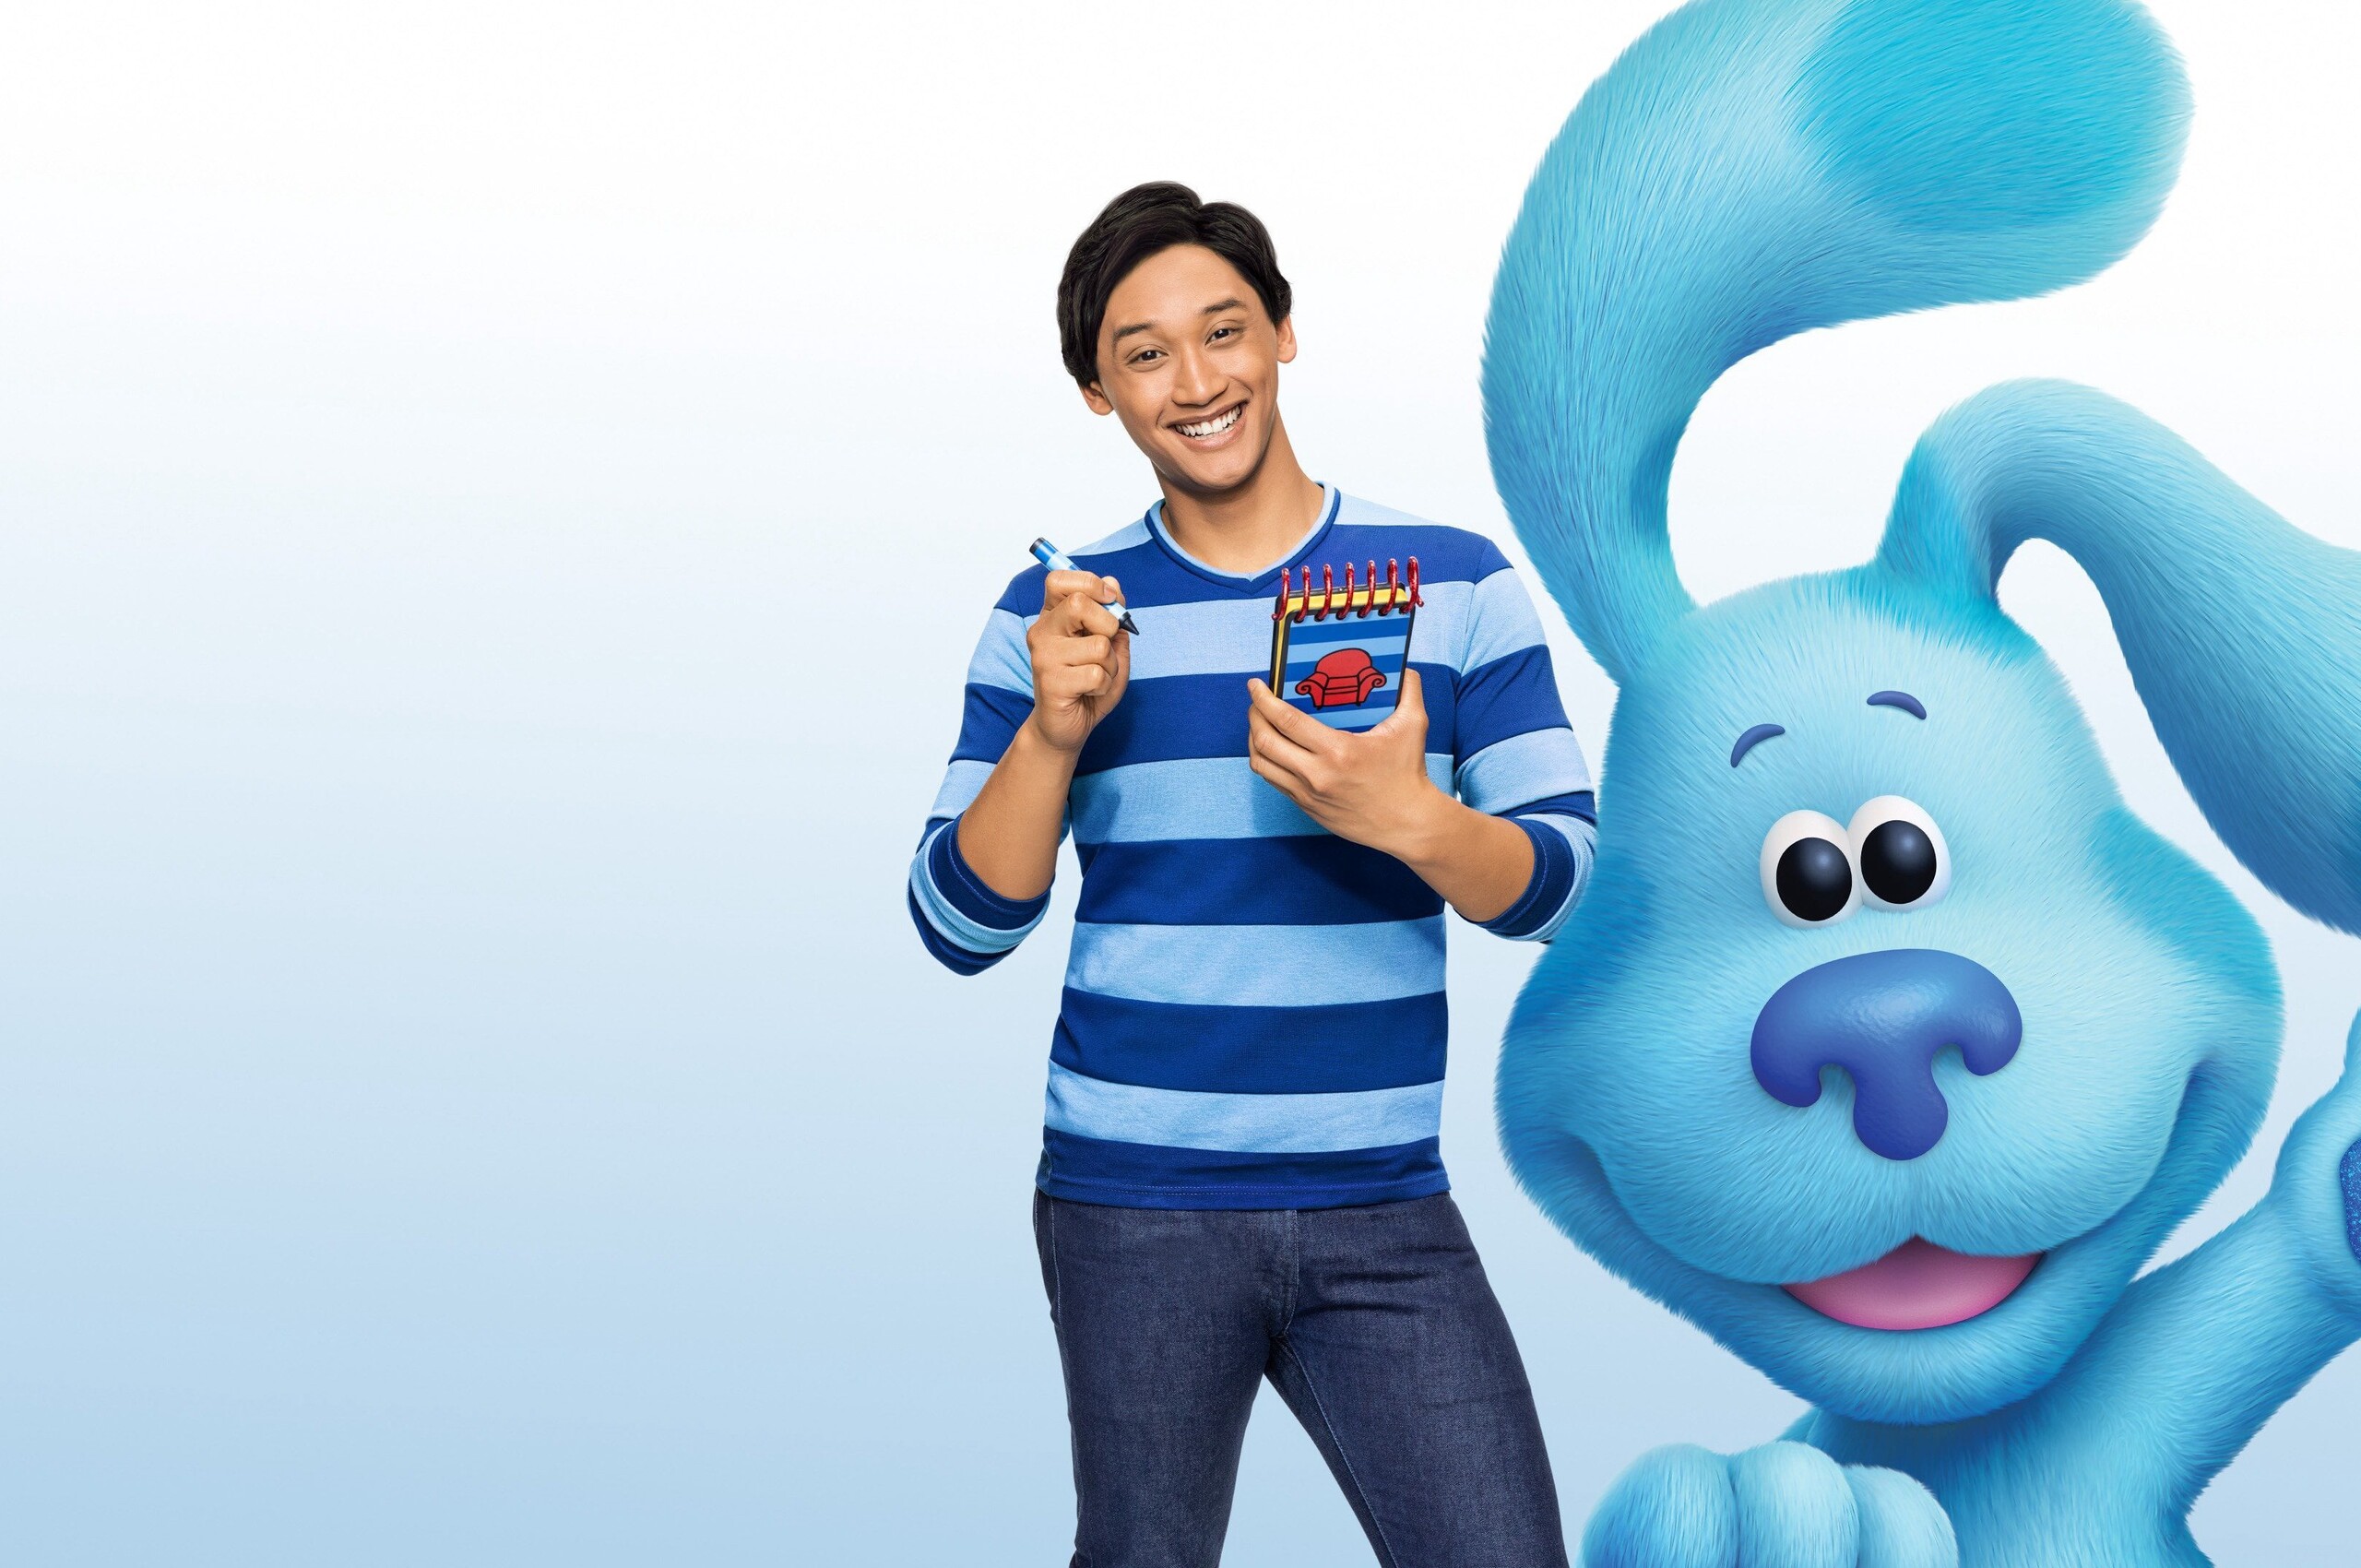 Blues Clues And You In 2560x1700 Resolution. blues-clues-and-you-sv.jpg. 